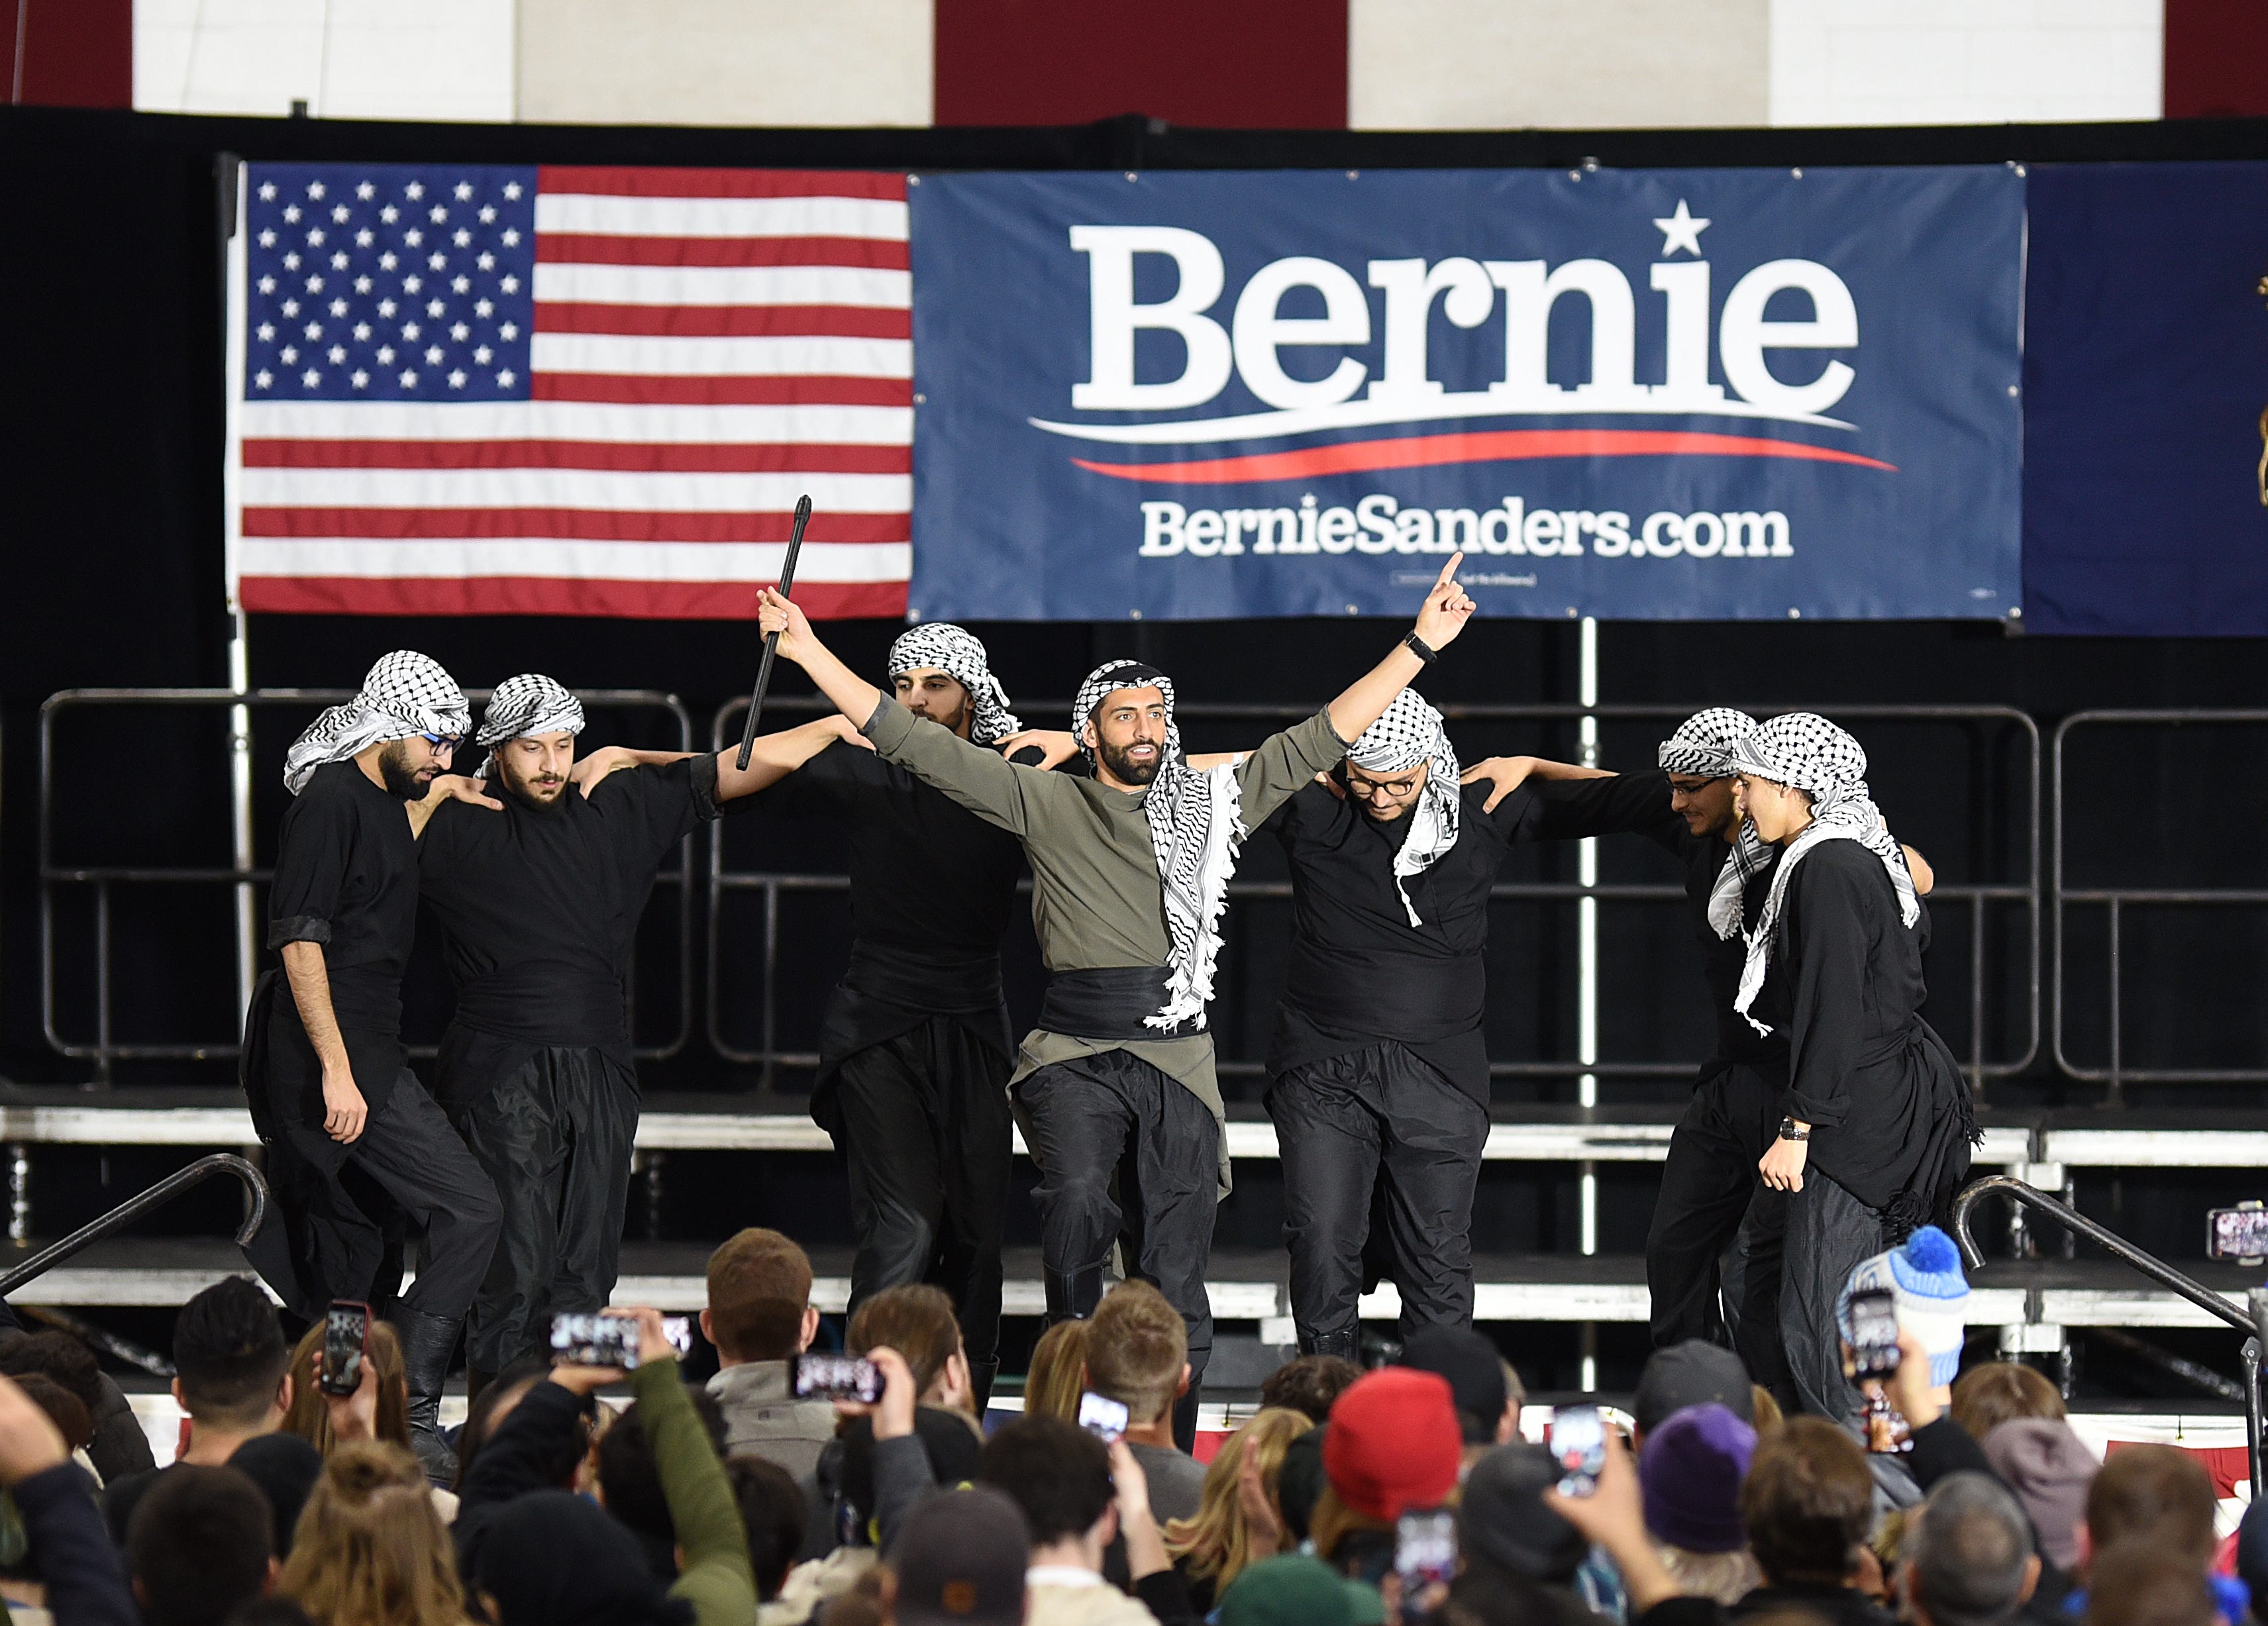 Members of the Mawtini Dabkeh Troupe of Dearborn perform before presidential candidate Bernie Sanders spoke on stage during a campaign stop.